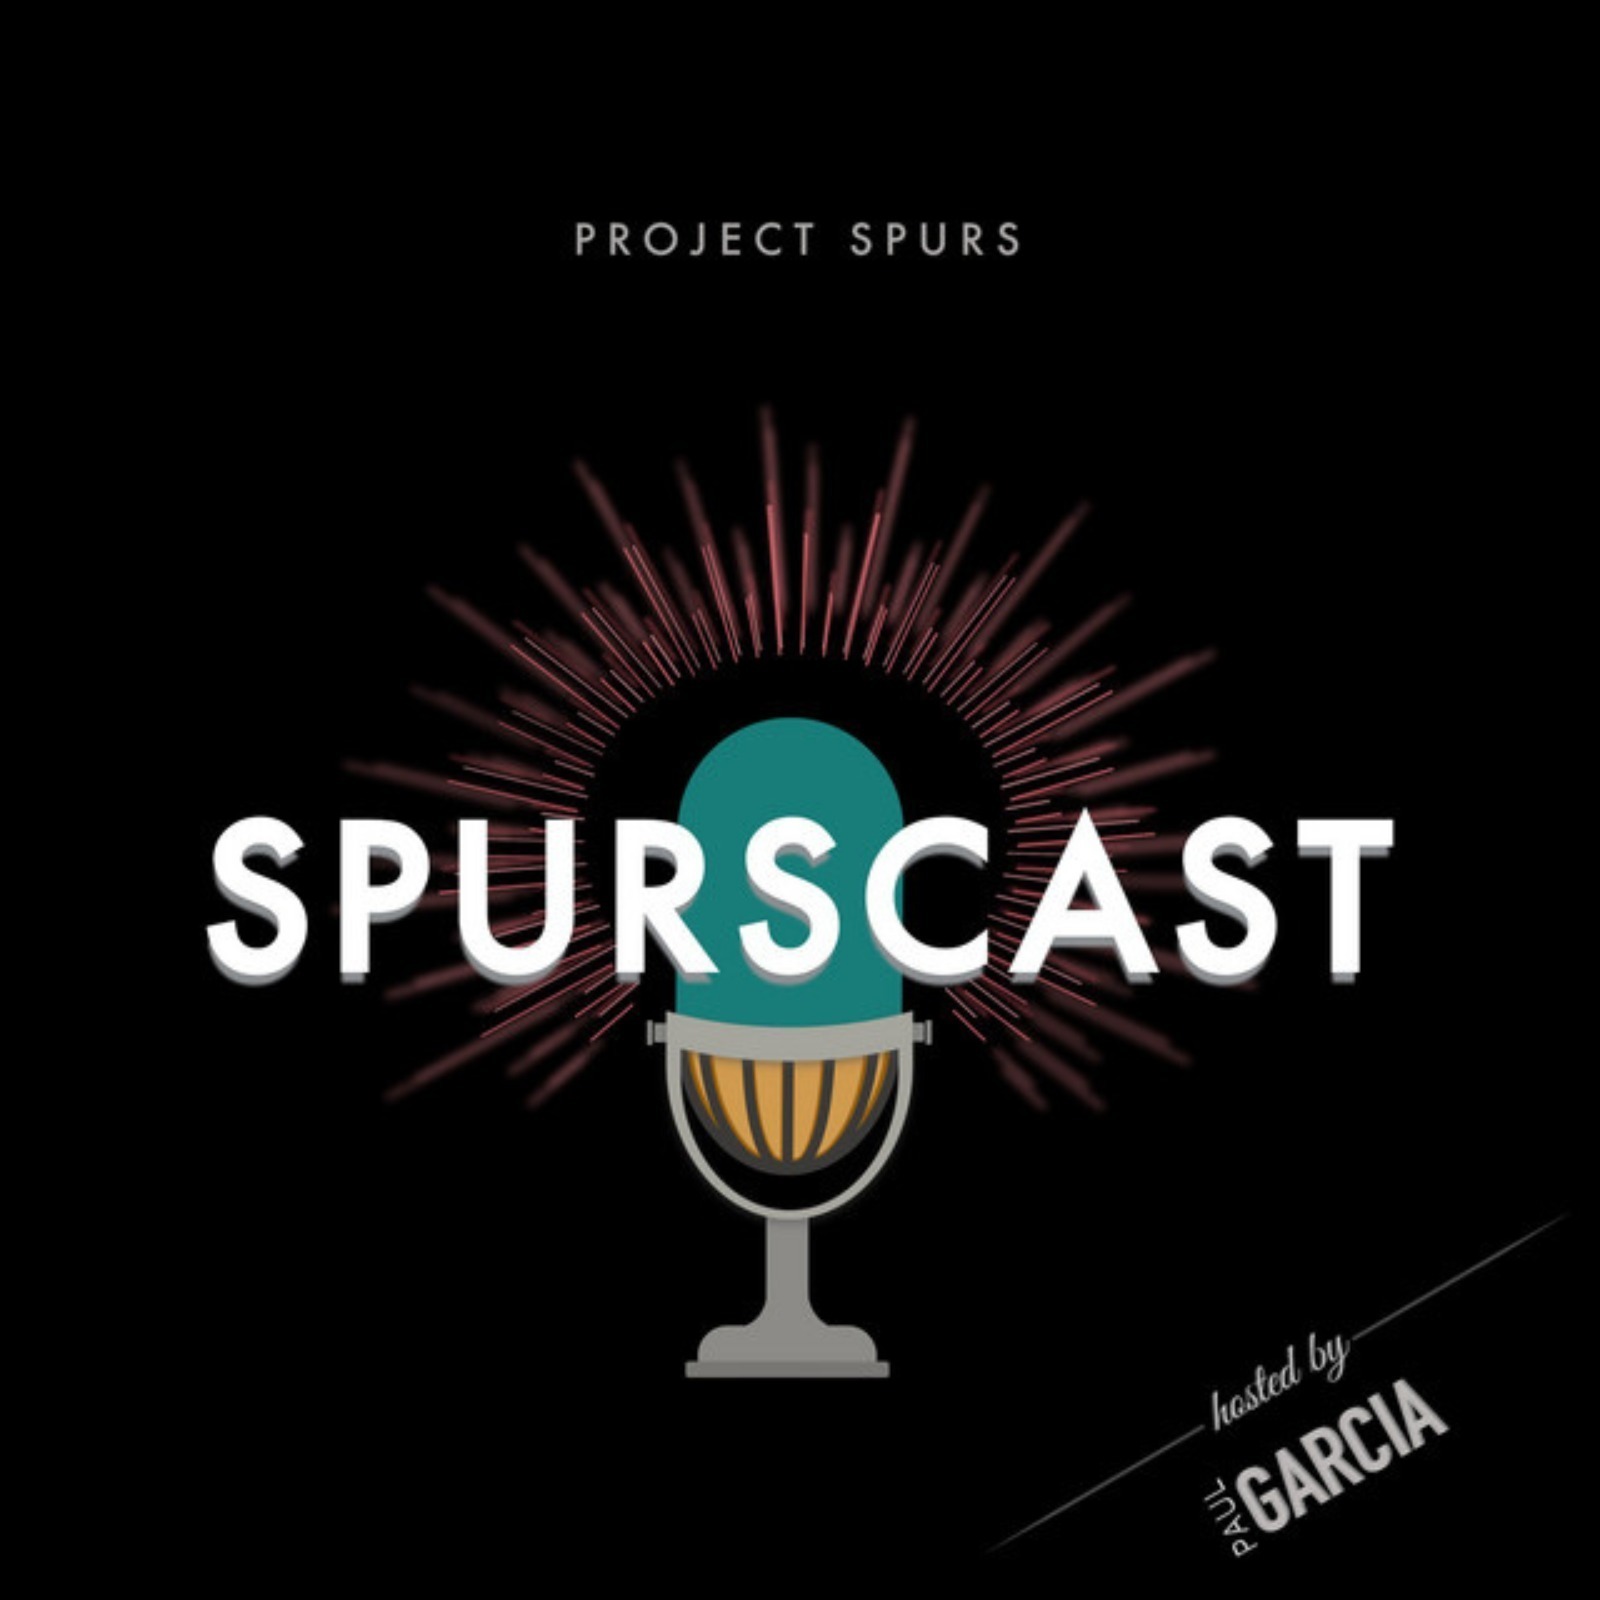 Spurscast Ep. 735: Spurs Fall to Rockets, Malaki Branham’s Improved Play, and Avoiding a Particular Franchise Record